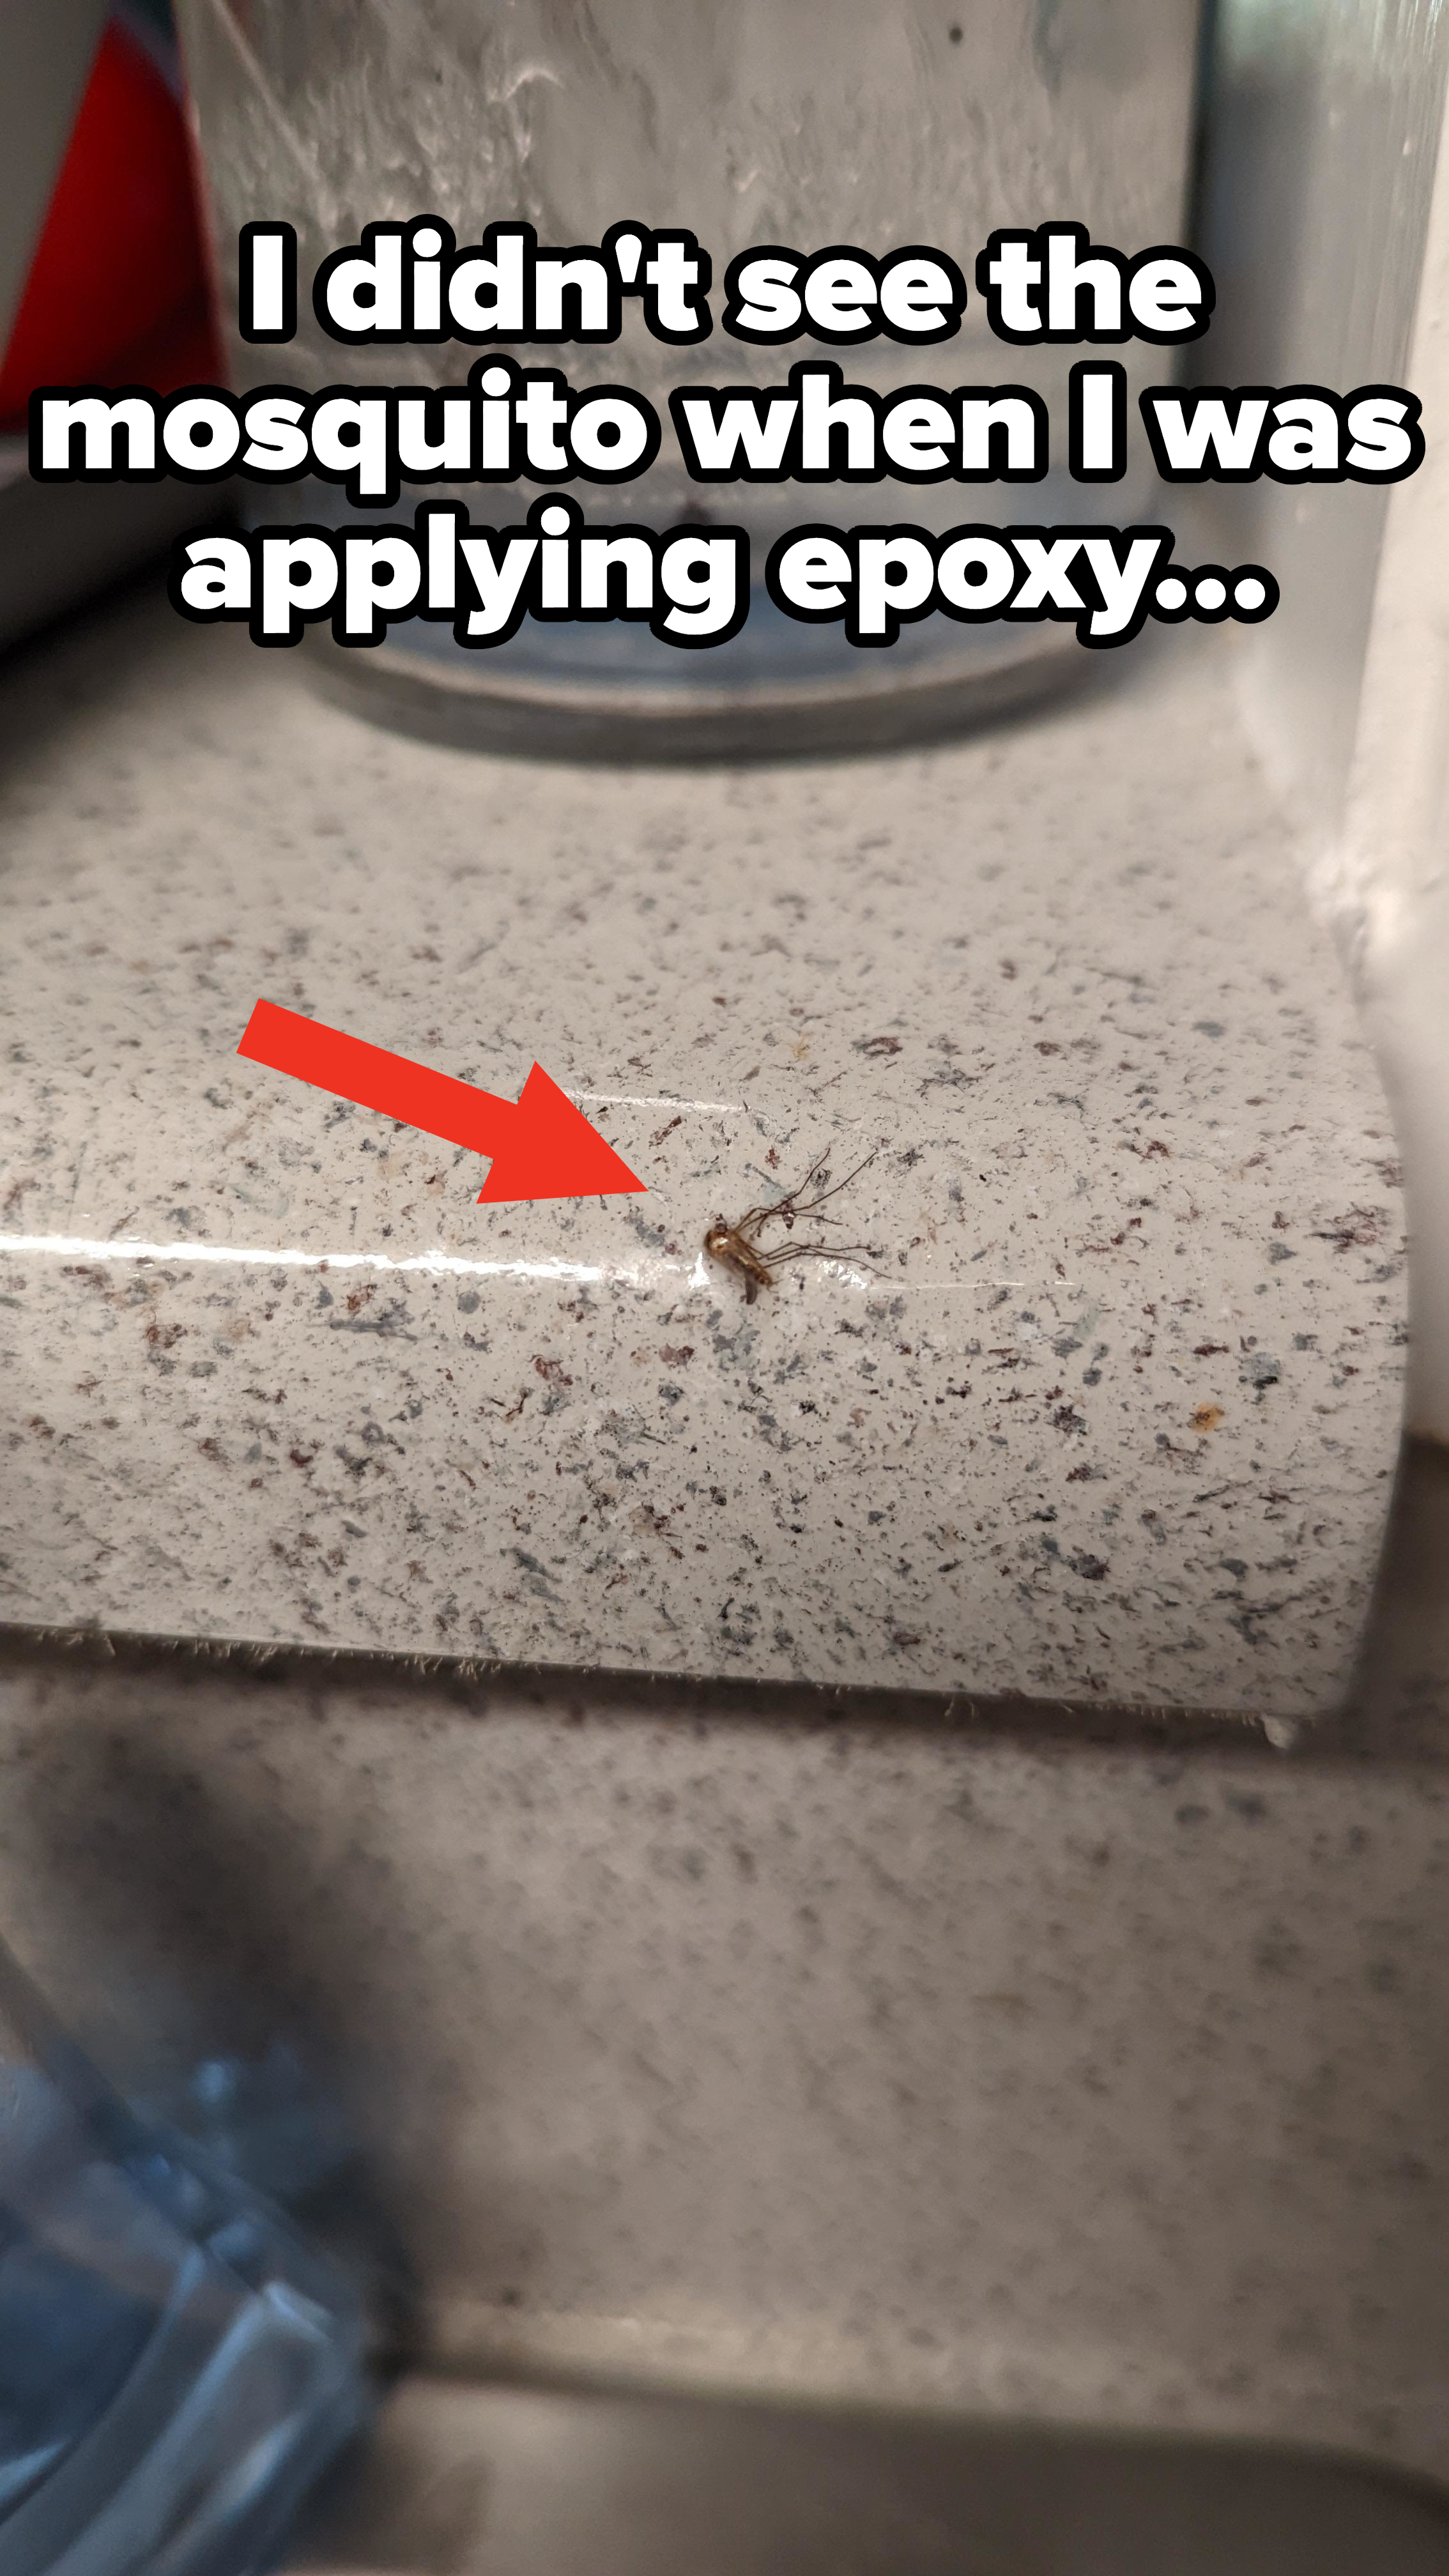 Arrow pointing to mosquito sealed under epoxy on a countertop